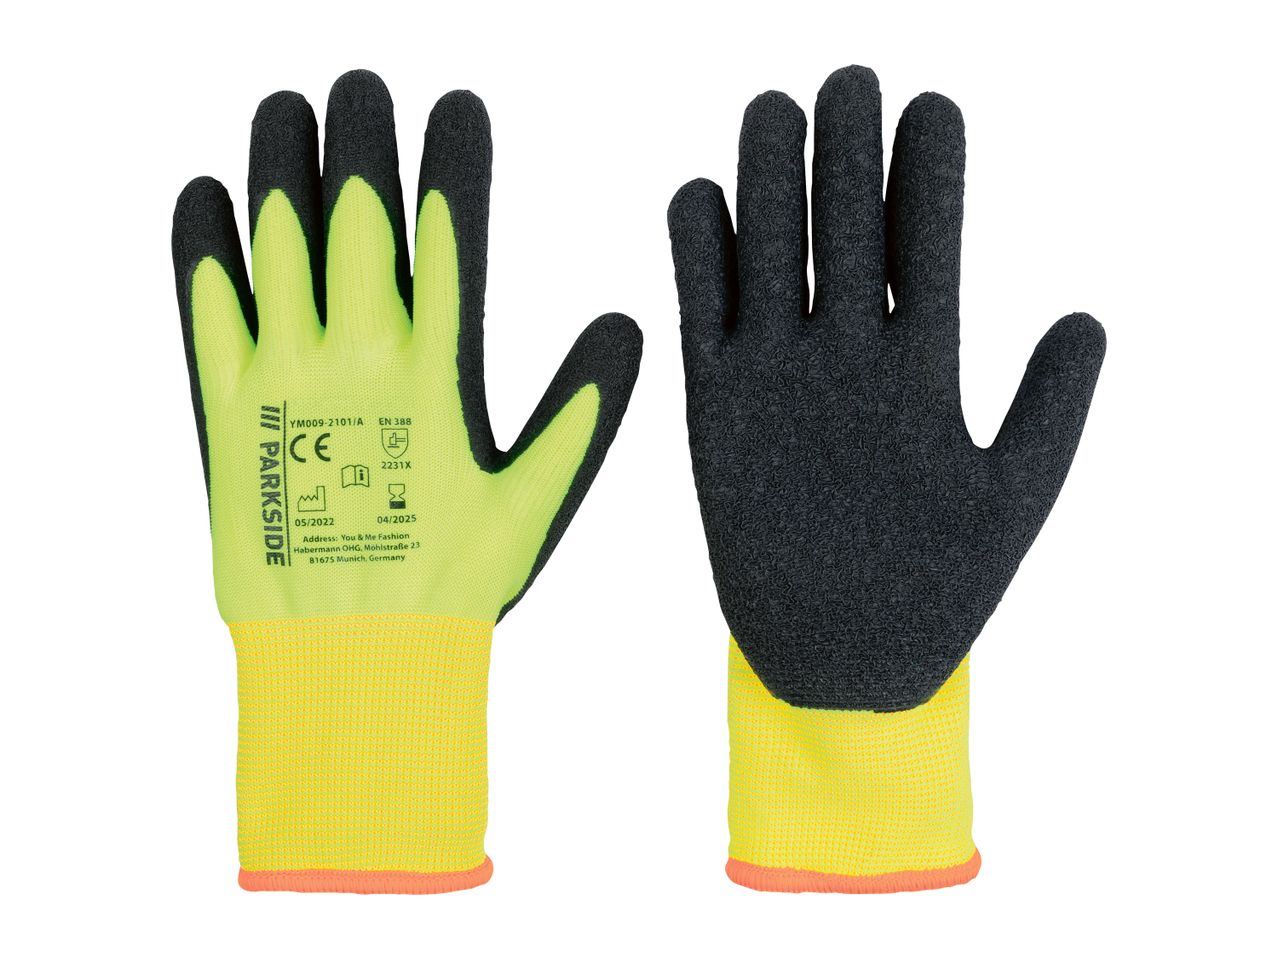 Go to full screen view: PARKSIDE Lined Work Gloves - Image 4